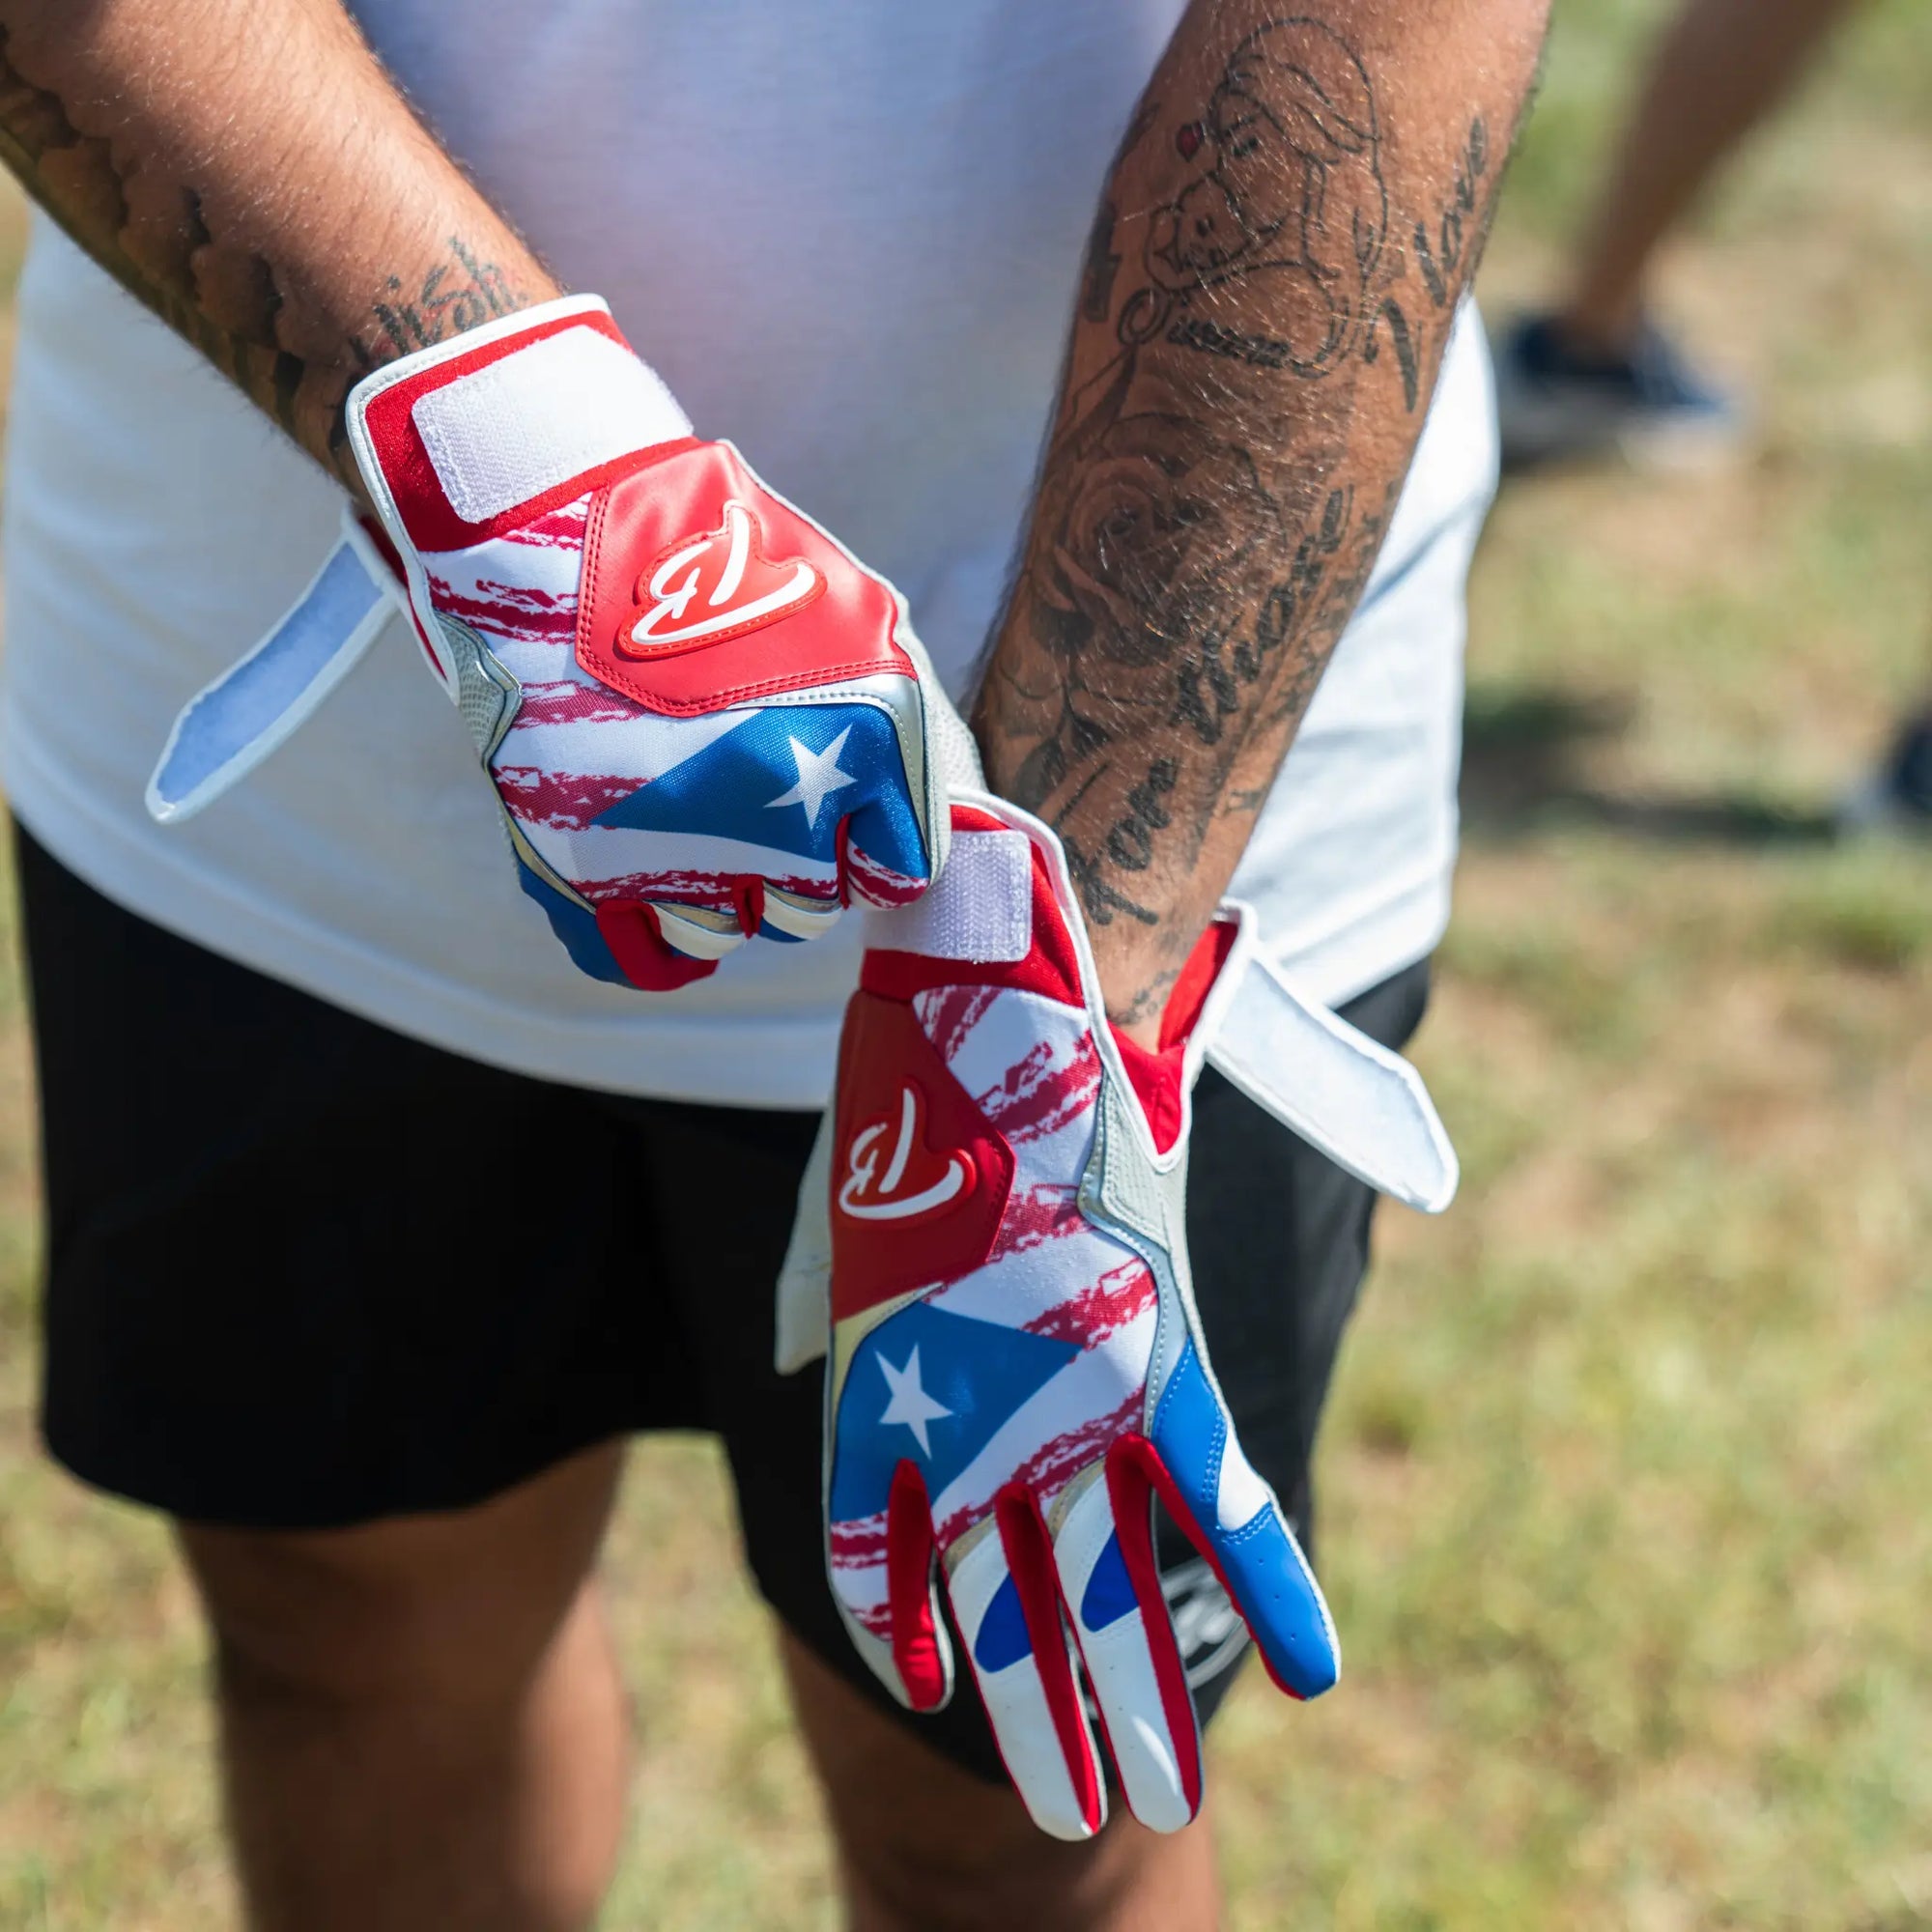 High-performance Tater baseball batting gloves featuring a Puerto Rico-inspired design with vivid red, white, and blue colors, accented with a single star, and the distinctive 'TB' logo for a touch of patriotic flair.